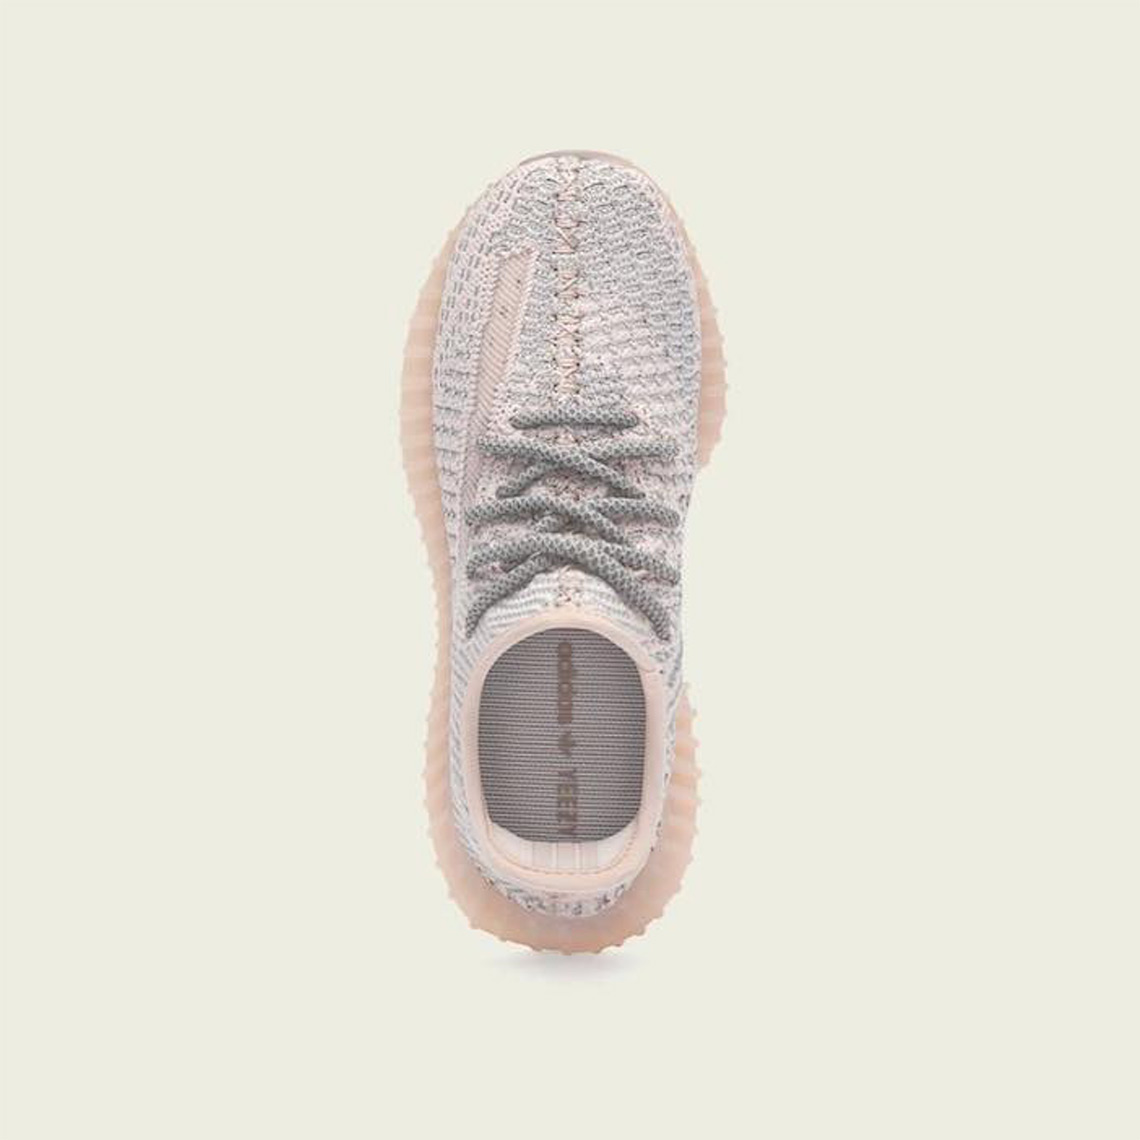 synth yeezy release